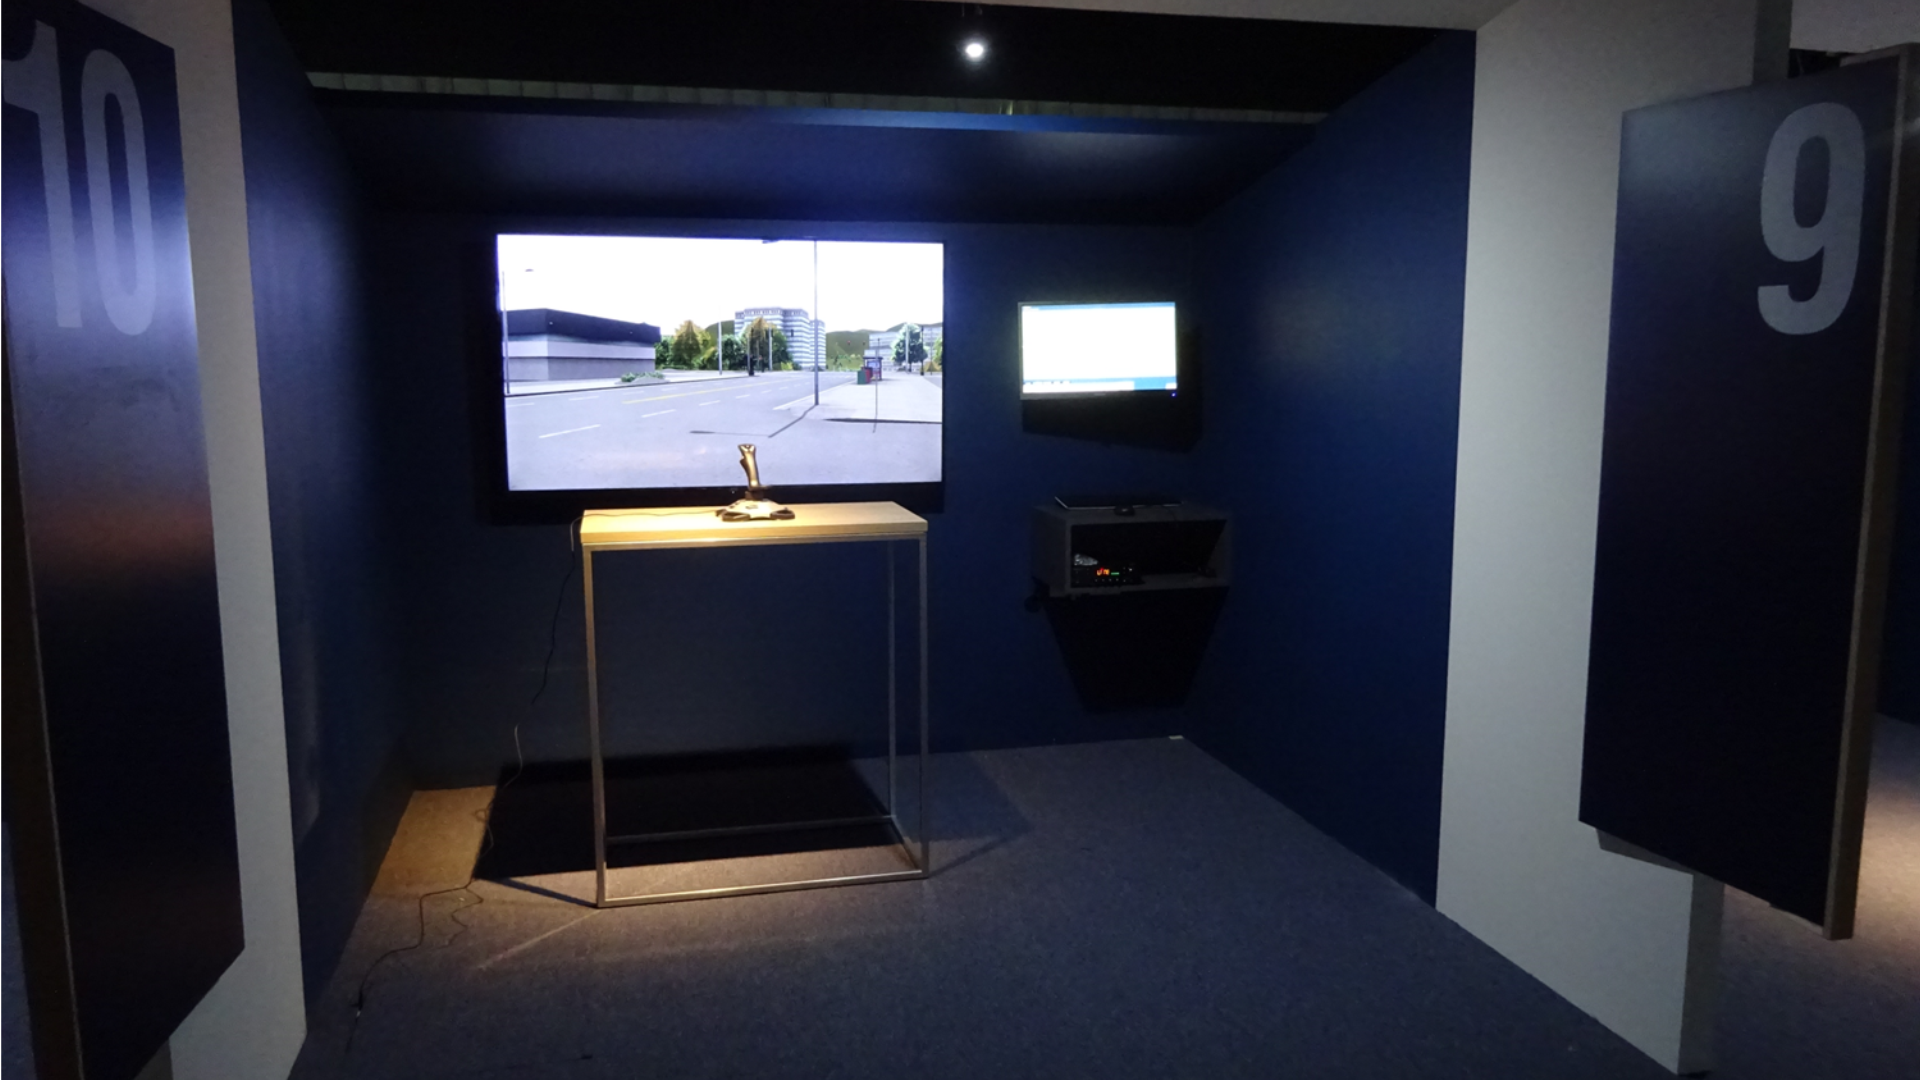 Field Unit Station with two displays, to view the 3D scene and control resources on the 2D map, and a joystick to explore the environment.